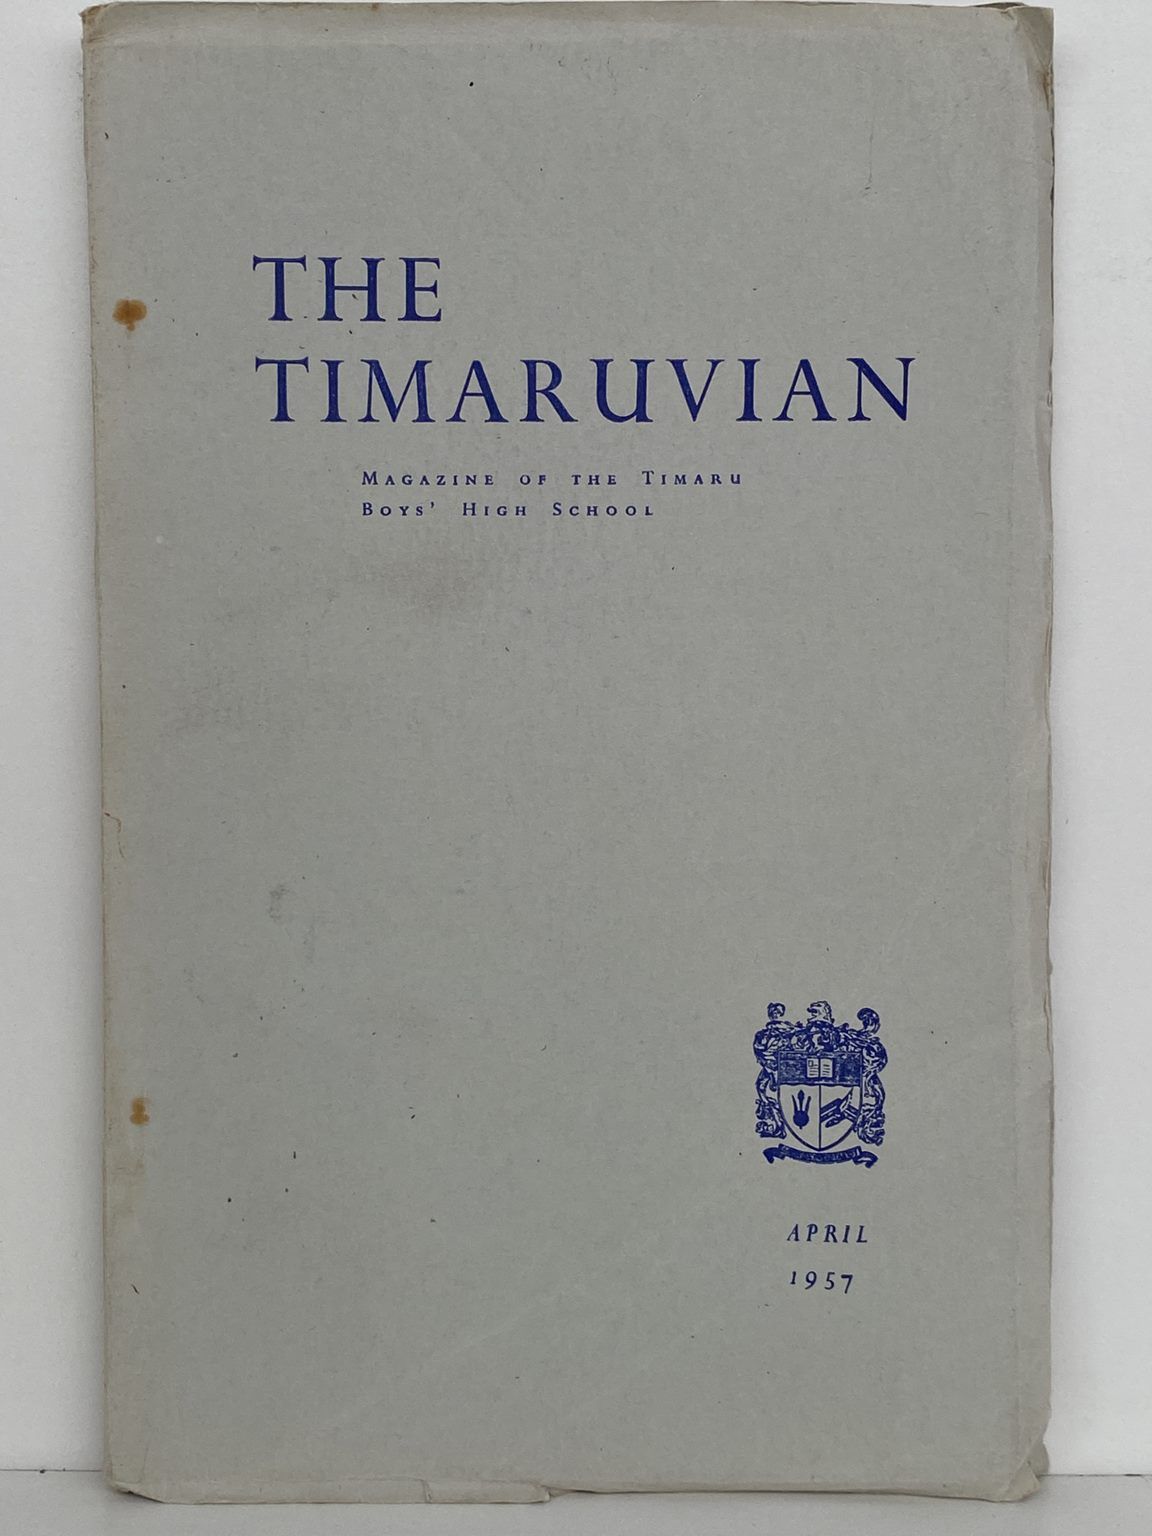 THE TIMARUVIAN: Magazine of the Timaru Boys' High School and its Old Boys' Association 1957